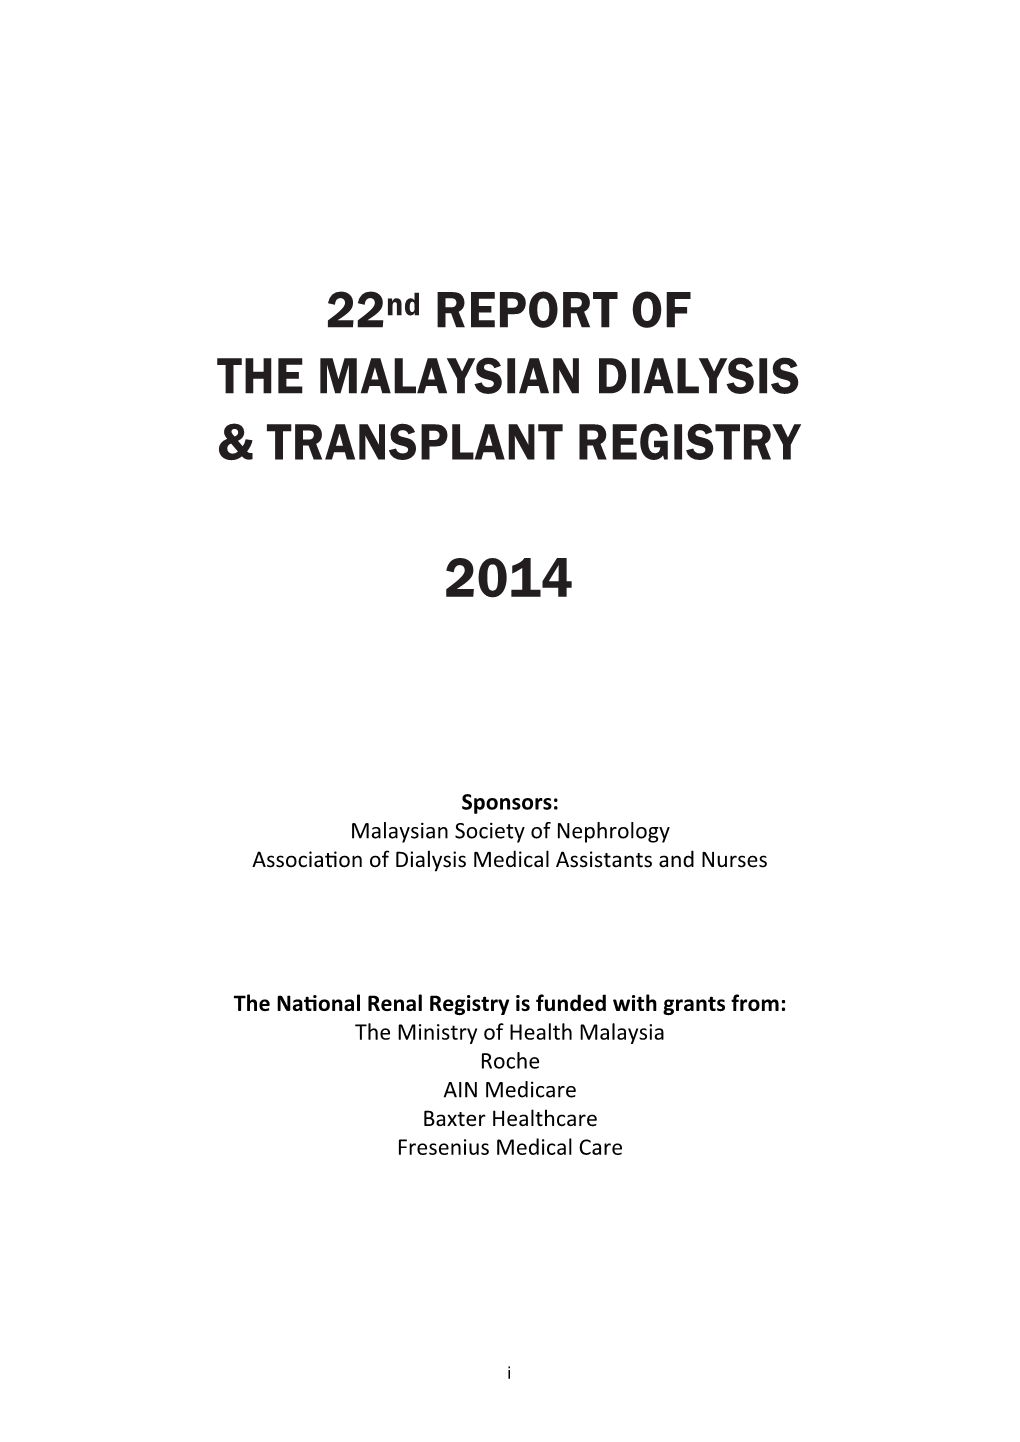 22Nd REPORT of the MALAYSIAN DIALYSIS & TRANSPLANT